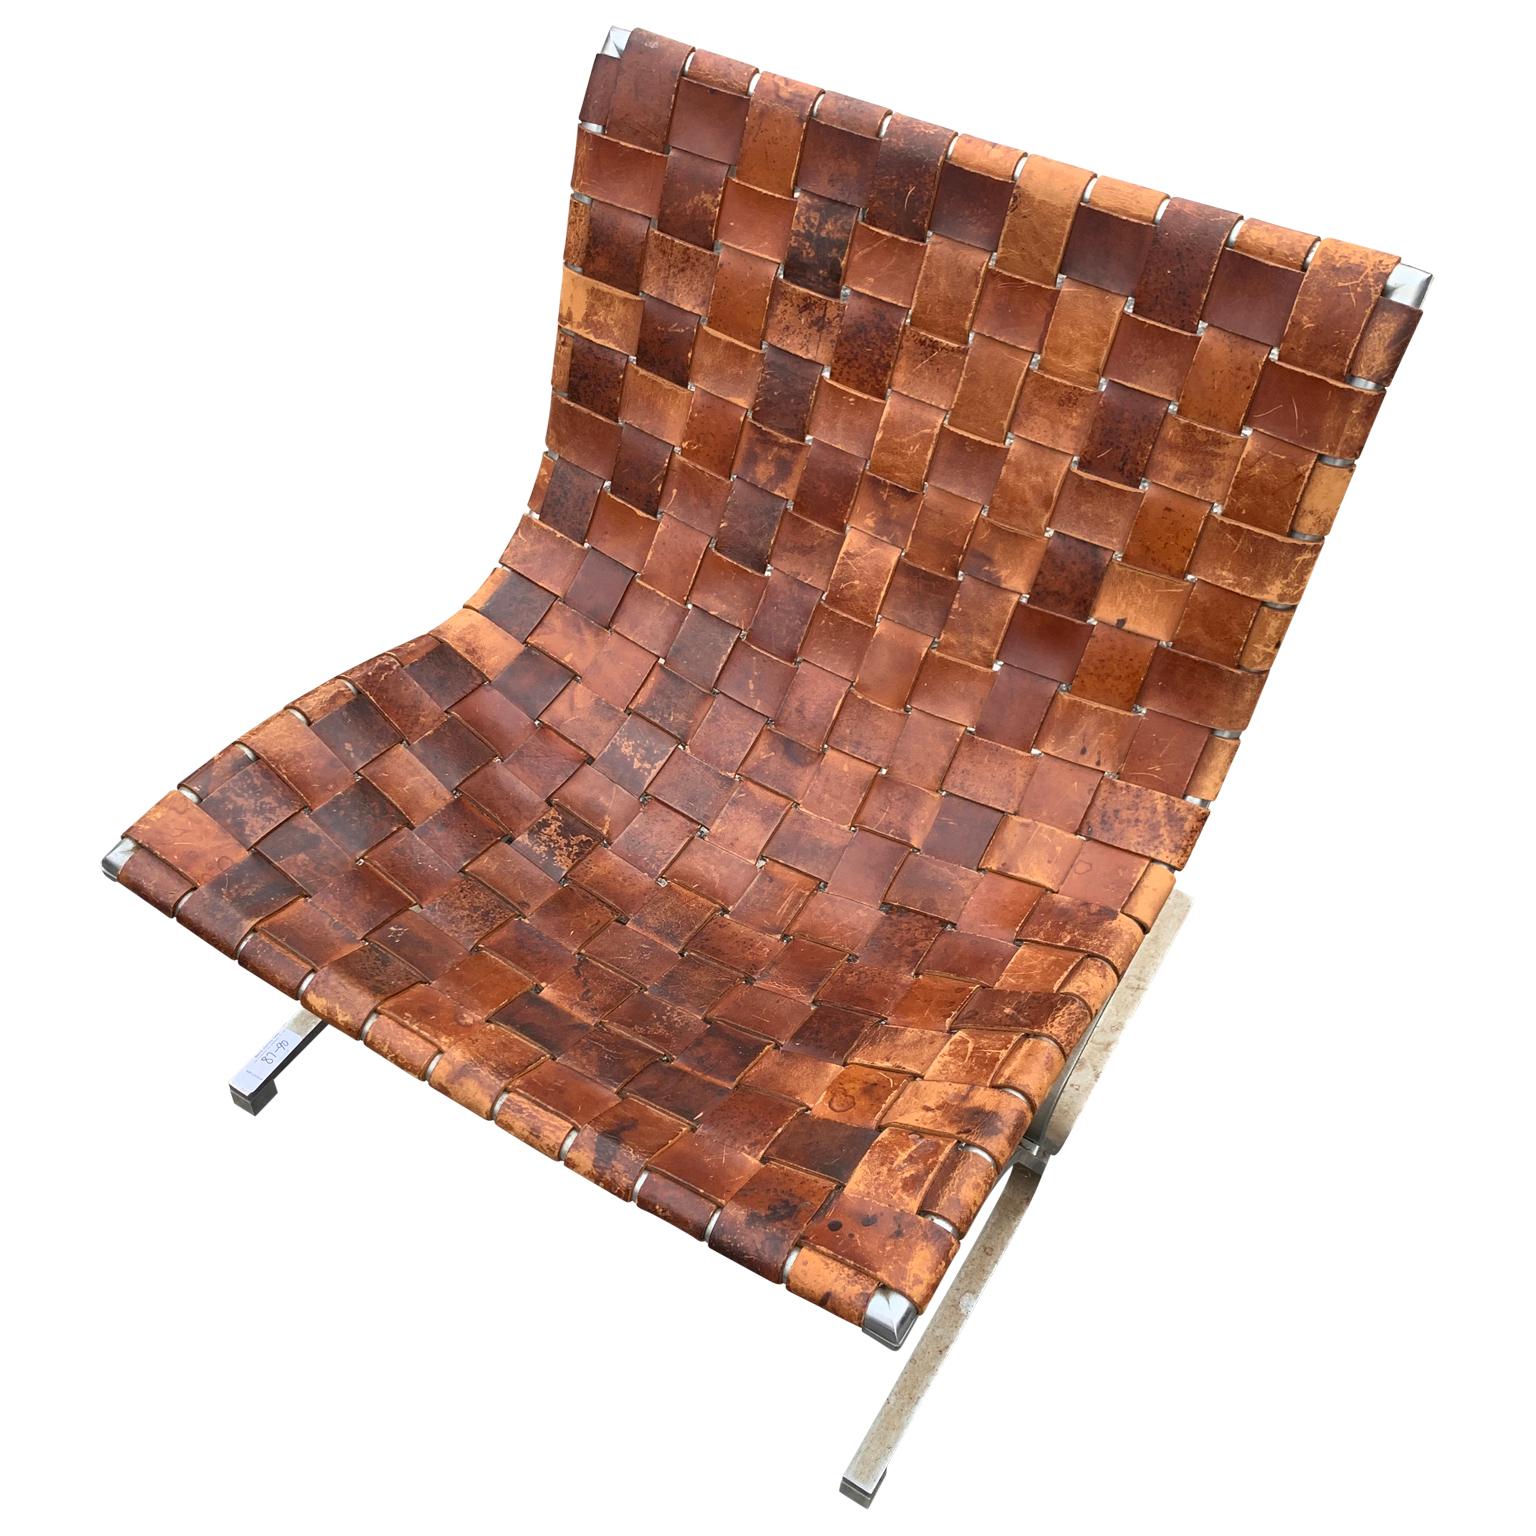 20th Century Italian Lounge Chair in Cognac-Color Leather by Ross Littell, Milan, Circa 1965